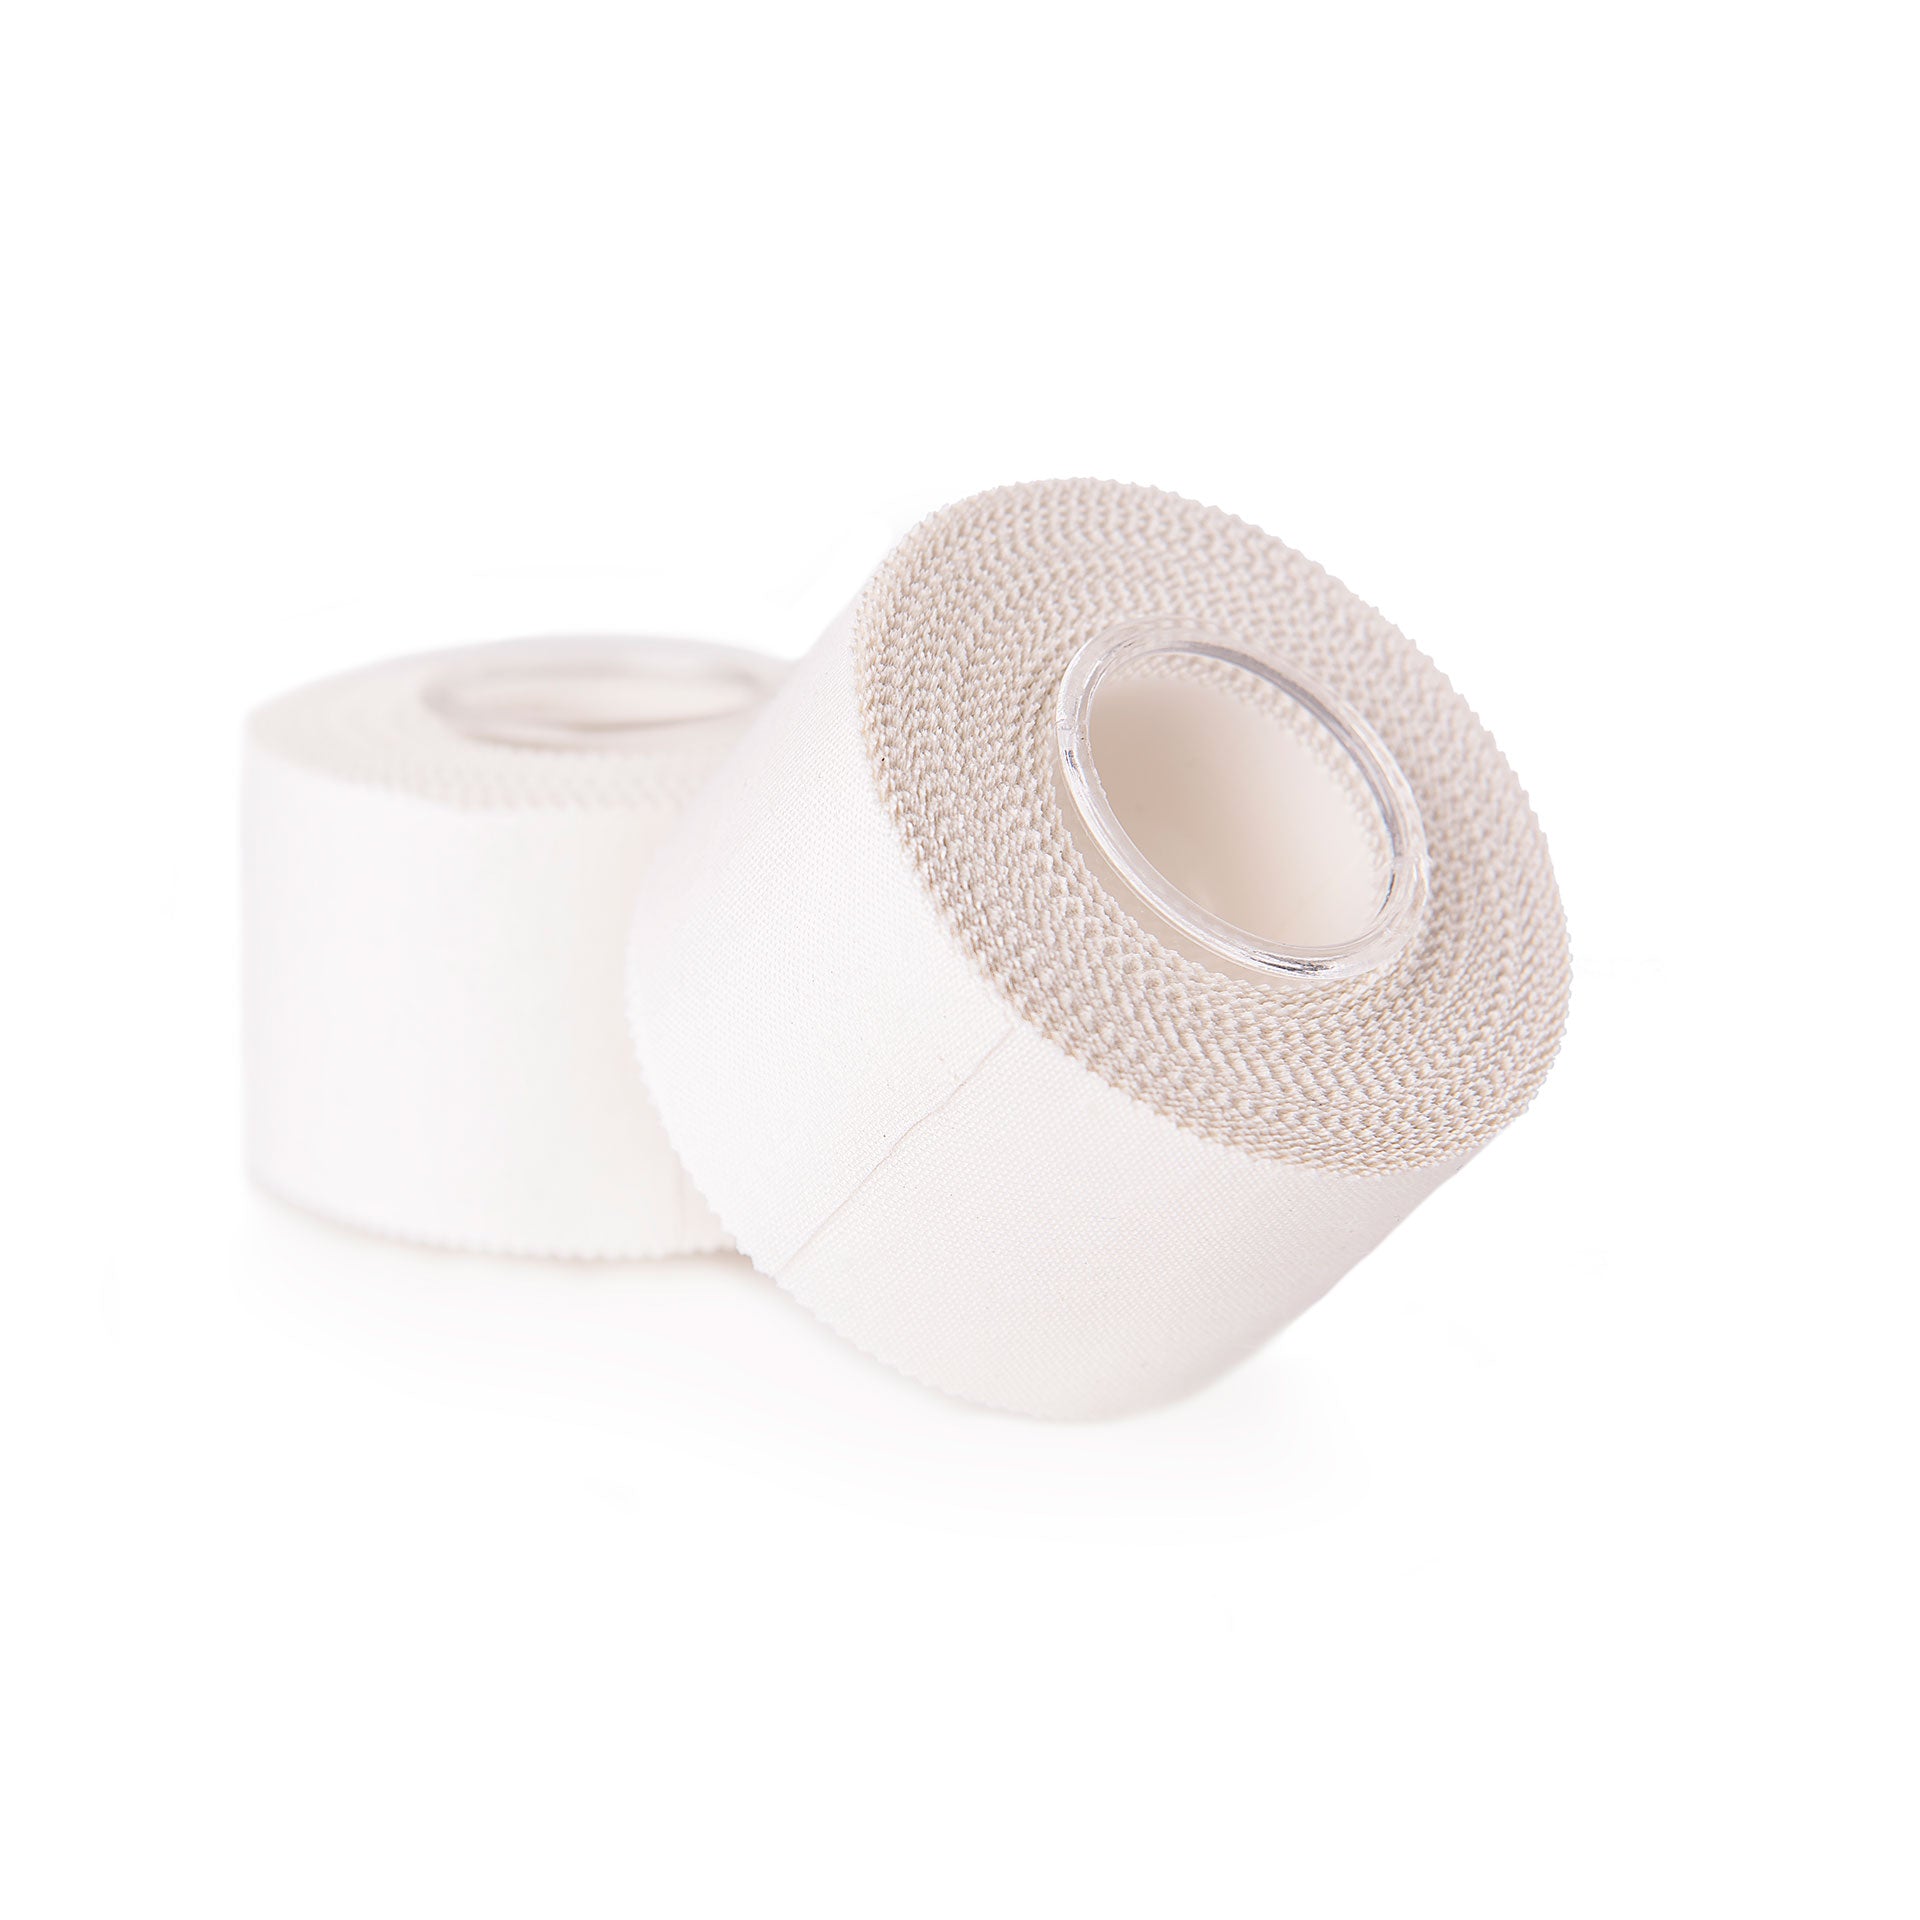 Buy sports tape, tape bandage for injuries